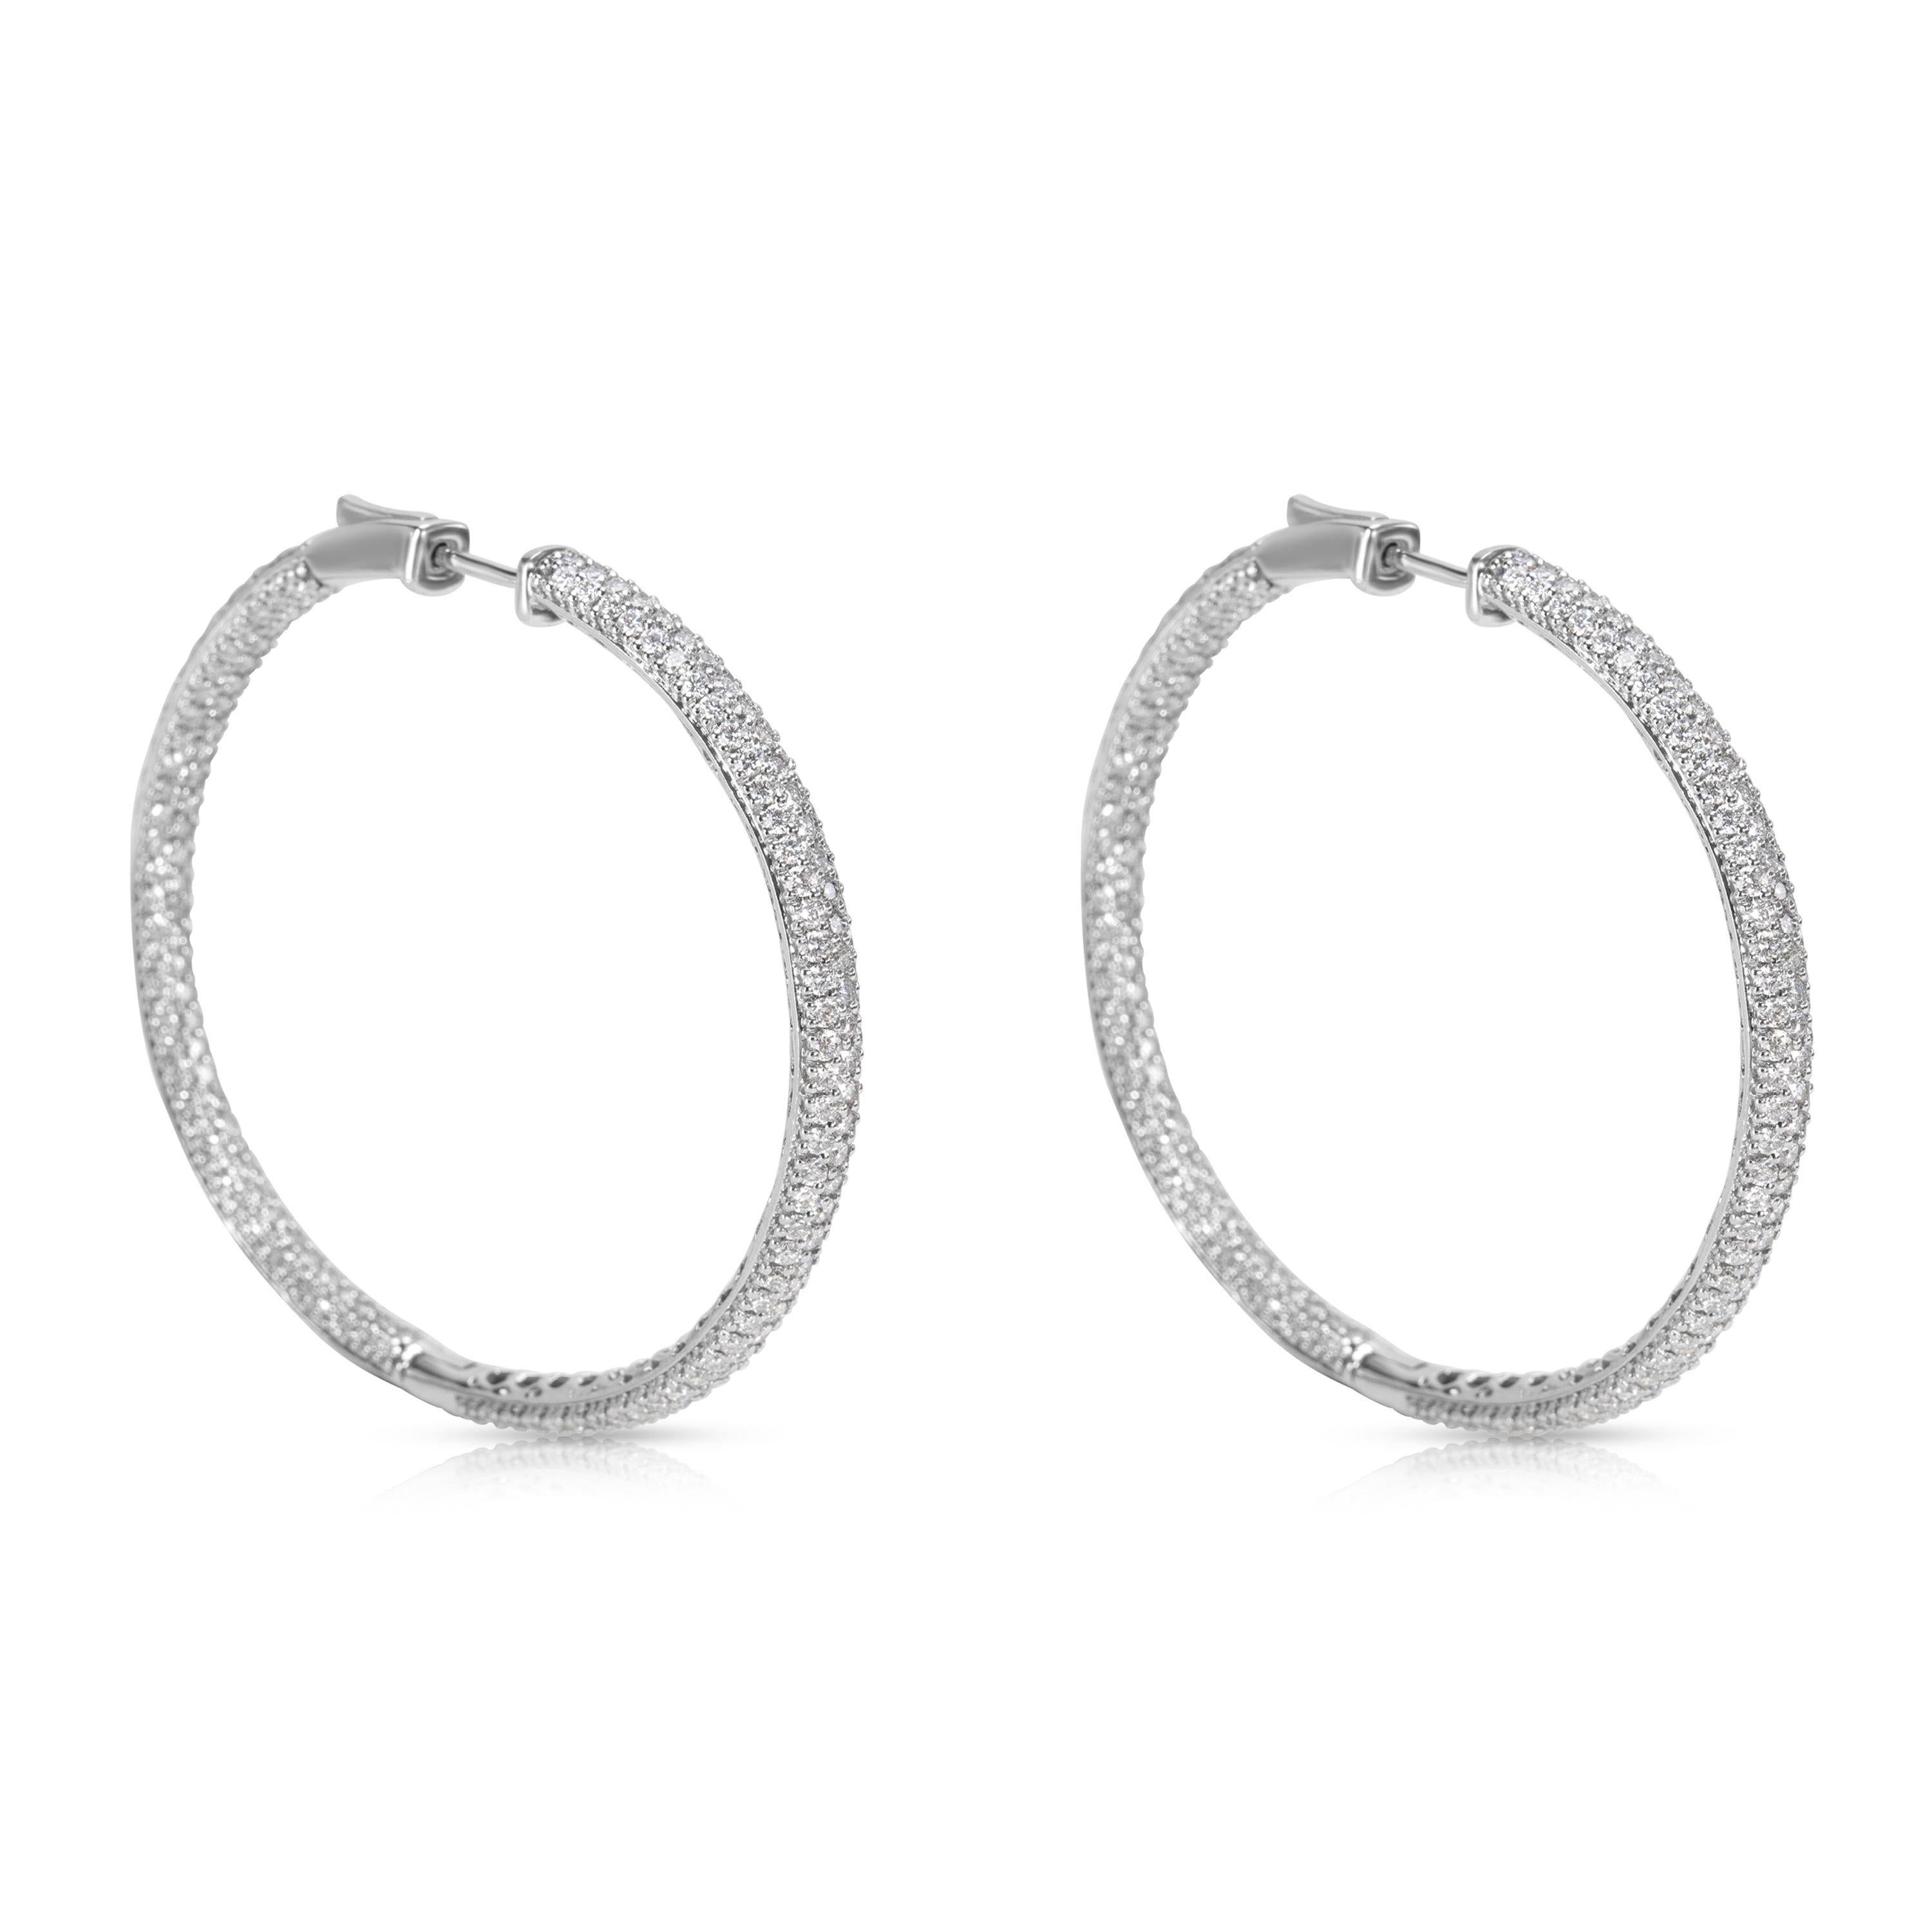 Brand New & unworn.  Earrings measure 2 inches in length.

Stone Type: Diamond
Stone Shape: Round
Stone Weight: 6.68 ctw
Stone Color: F-G
Stone Clarity: VS1-VS2
